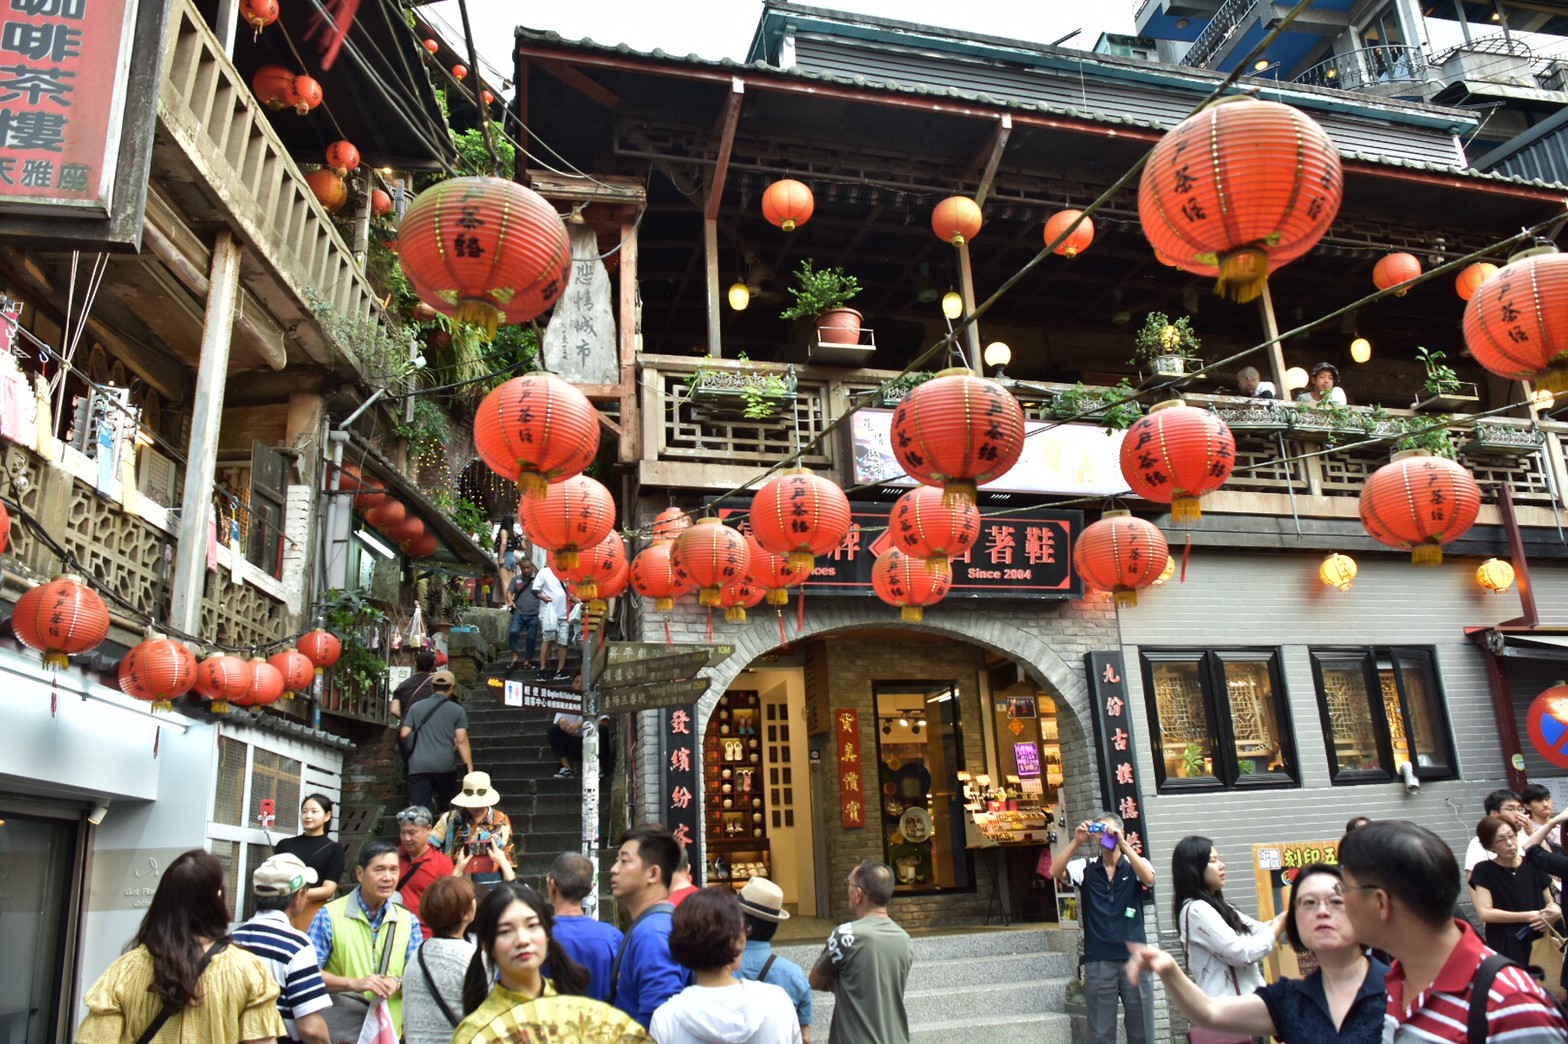 【Taipei Private Tour】A wonderful experience at Jiufen Old Street !